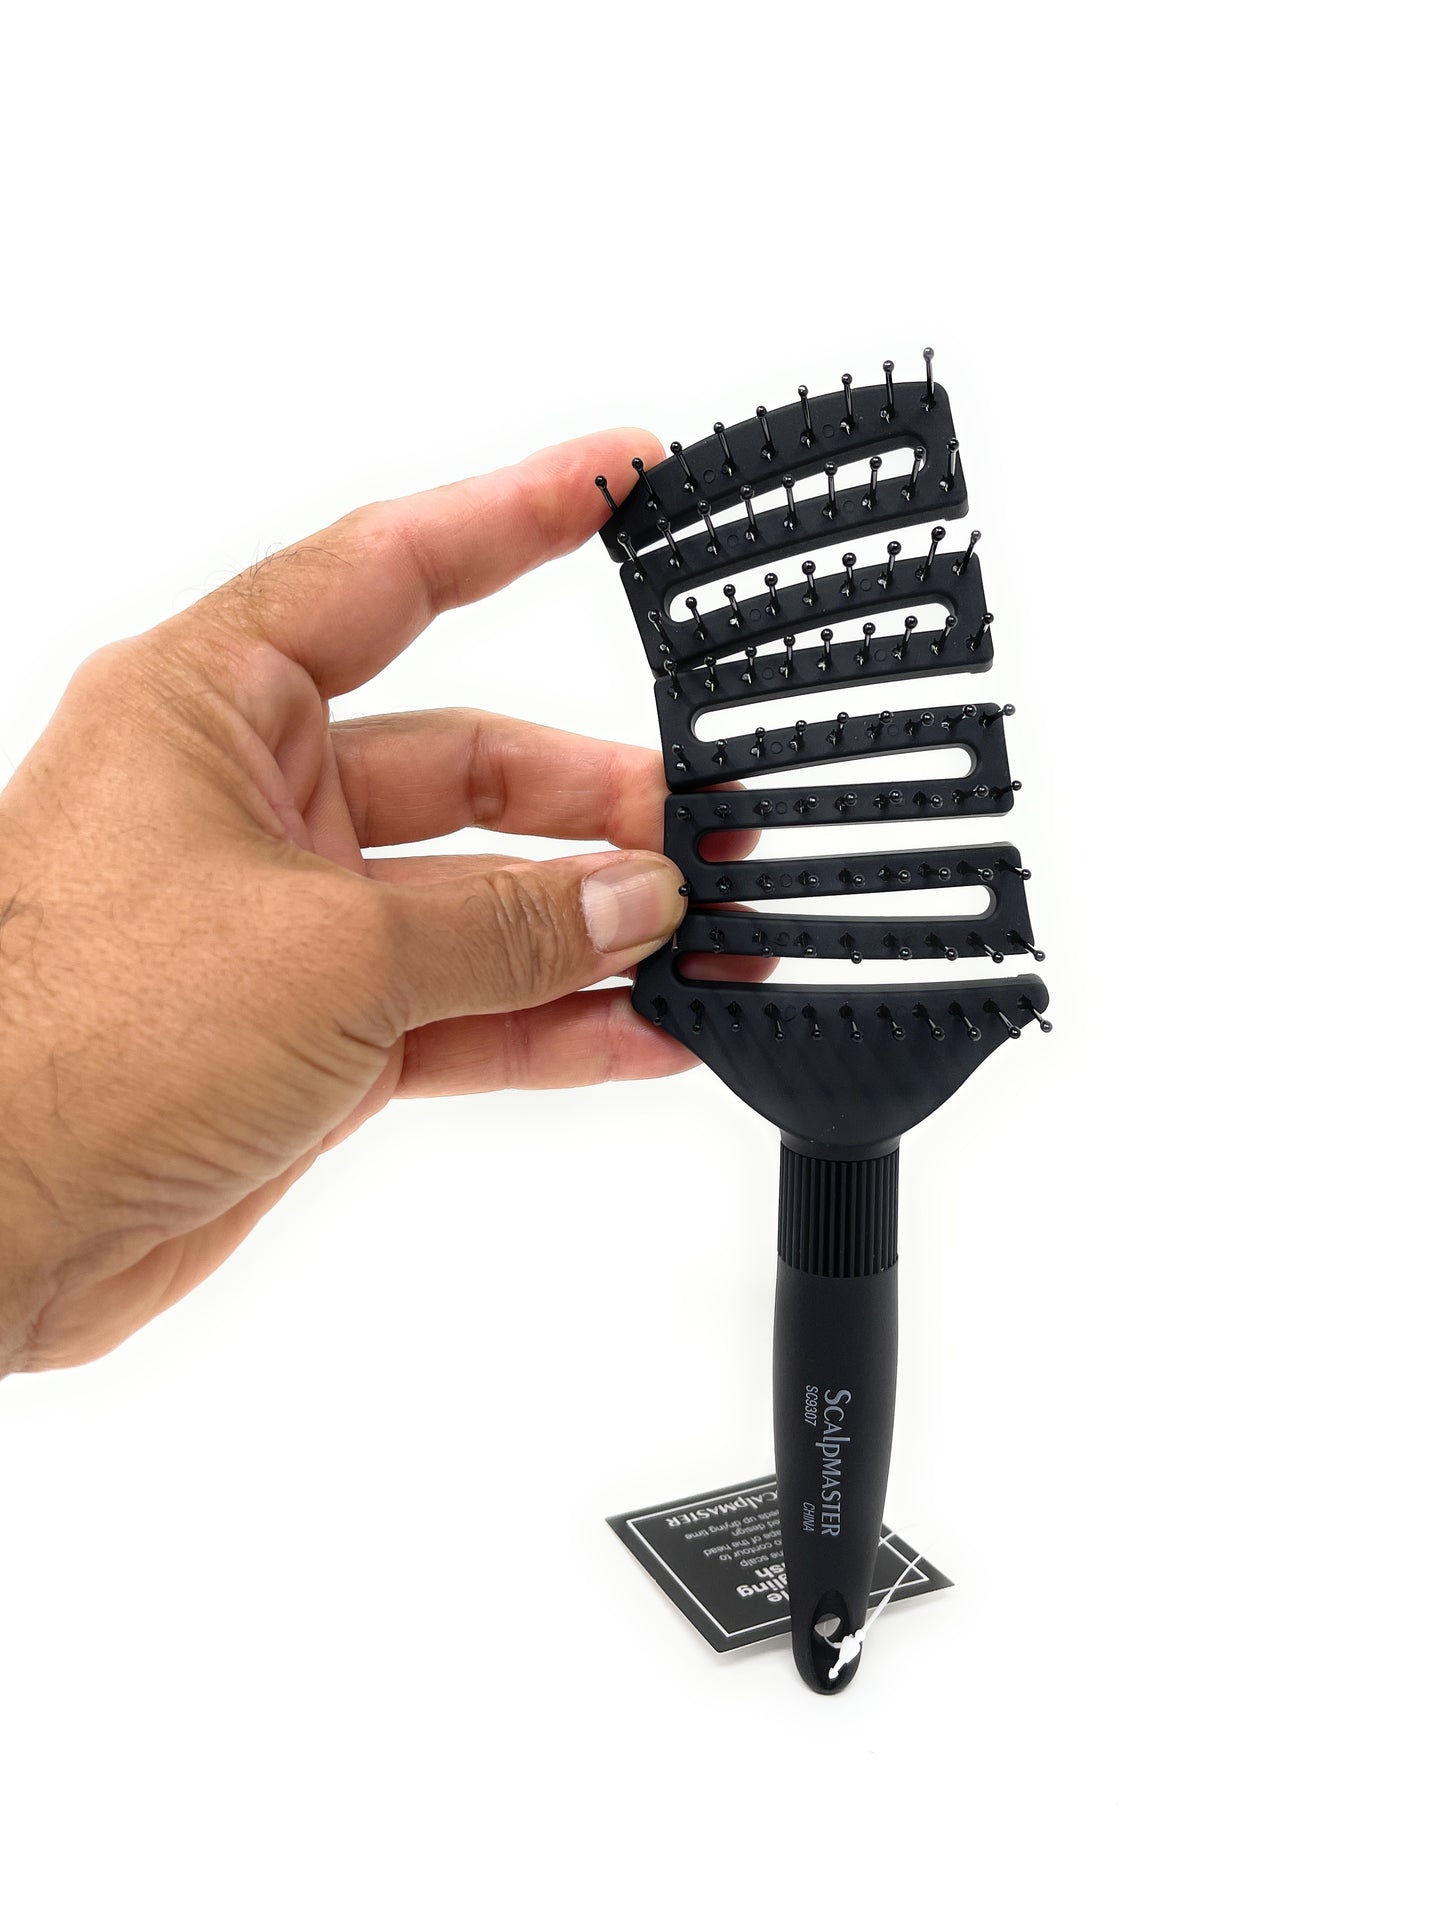 Sclapmaster Hair Brush Ball-tipped Bristles Flexible Vented For Hair Drying Detangling Hair Styling Soft Rubberized Handle. Black 1 Pc.